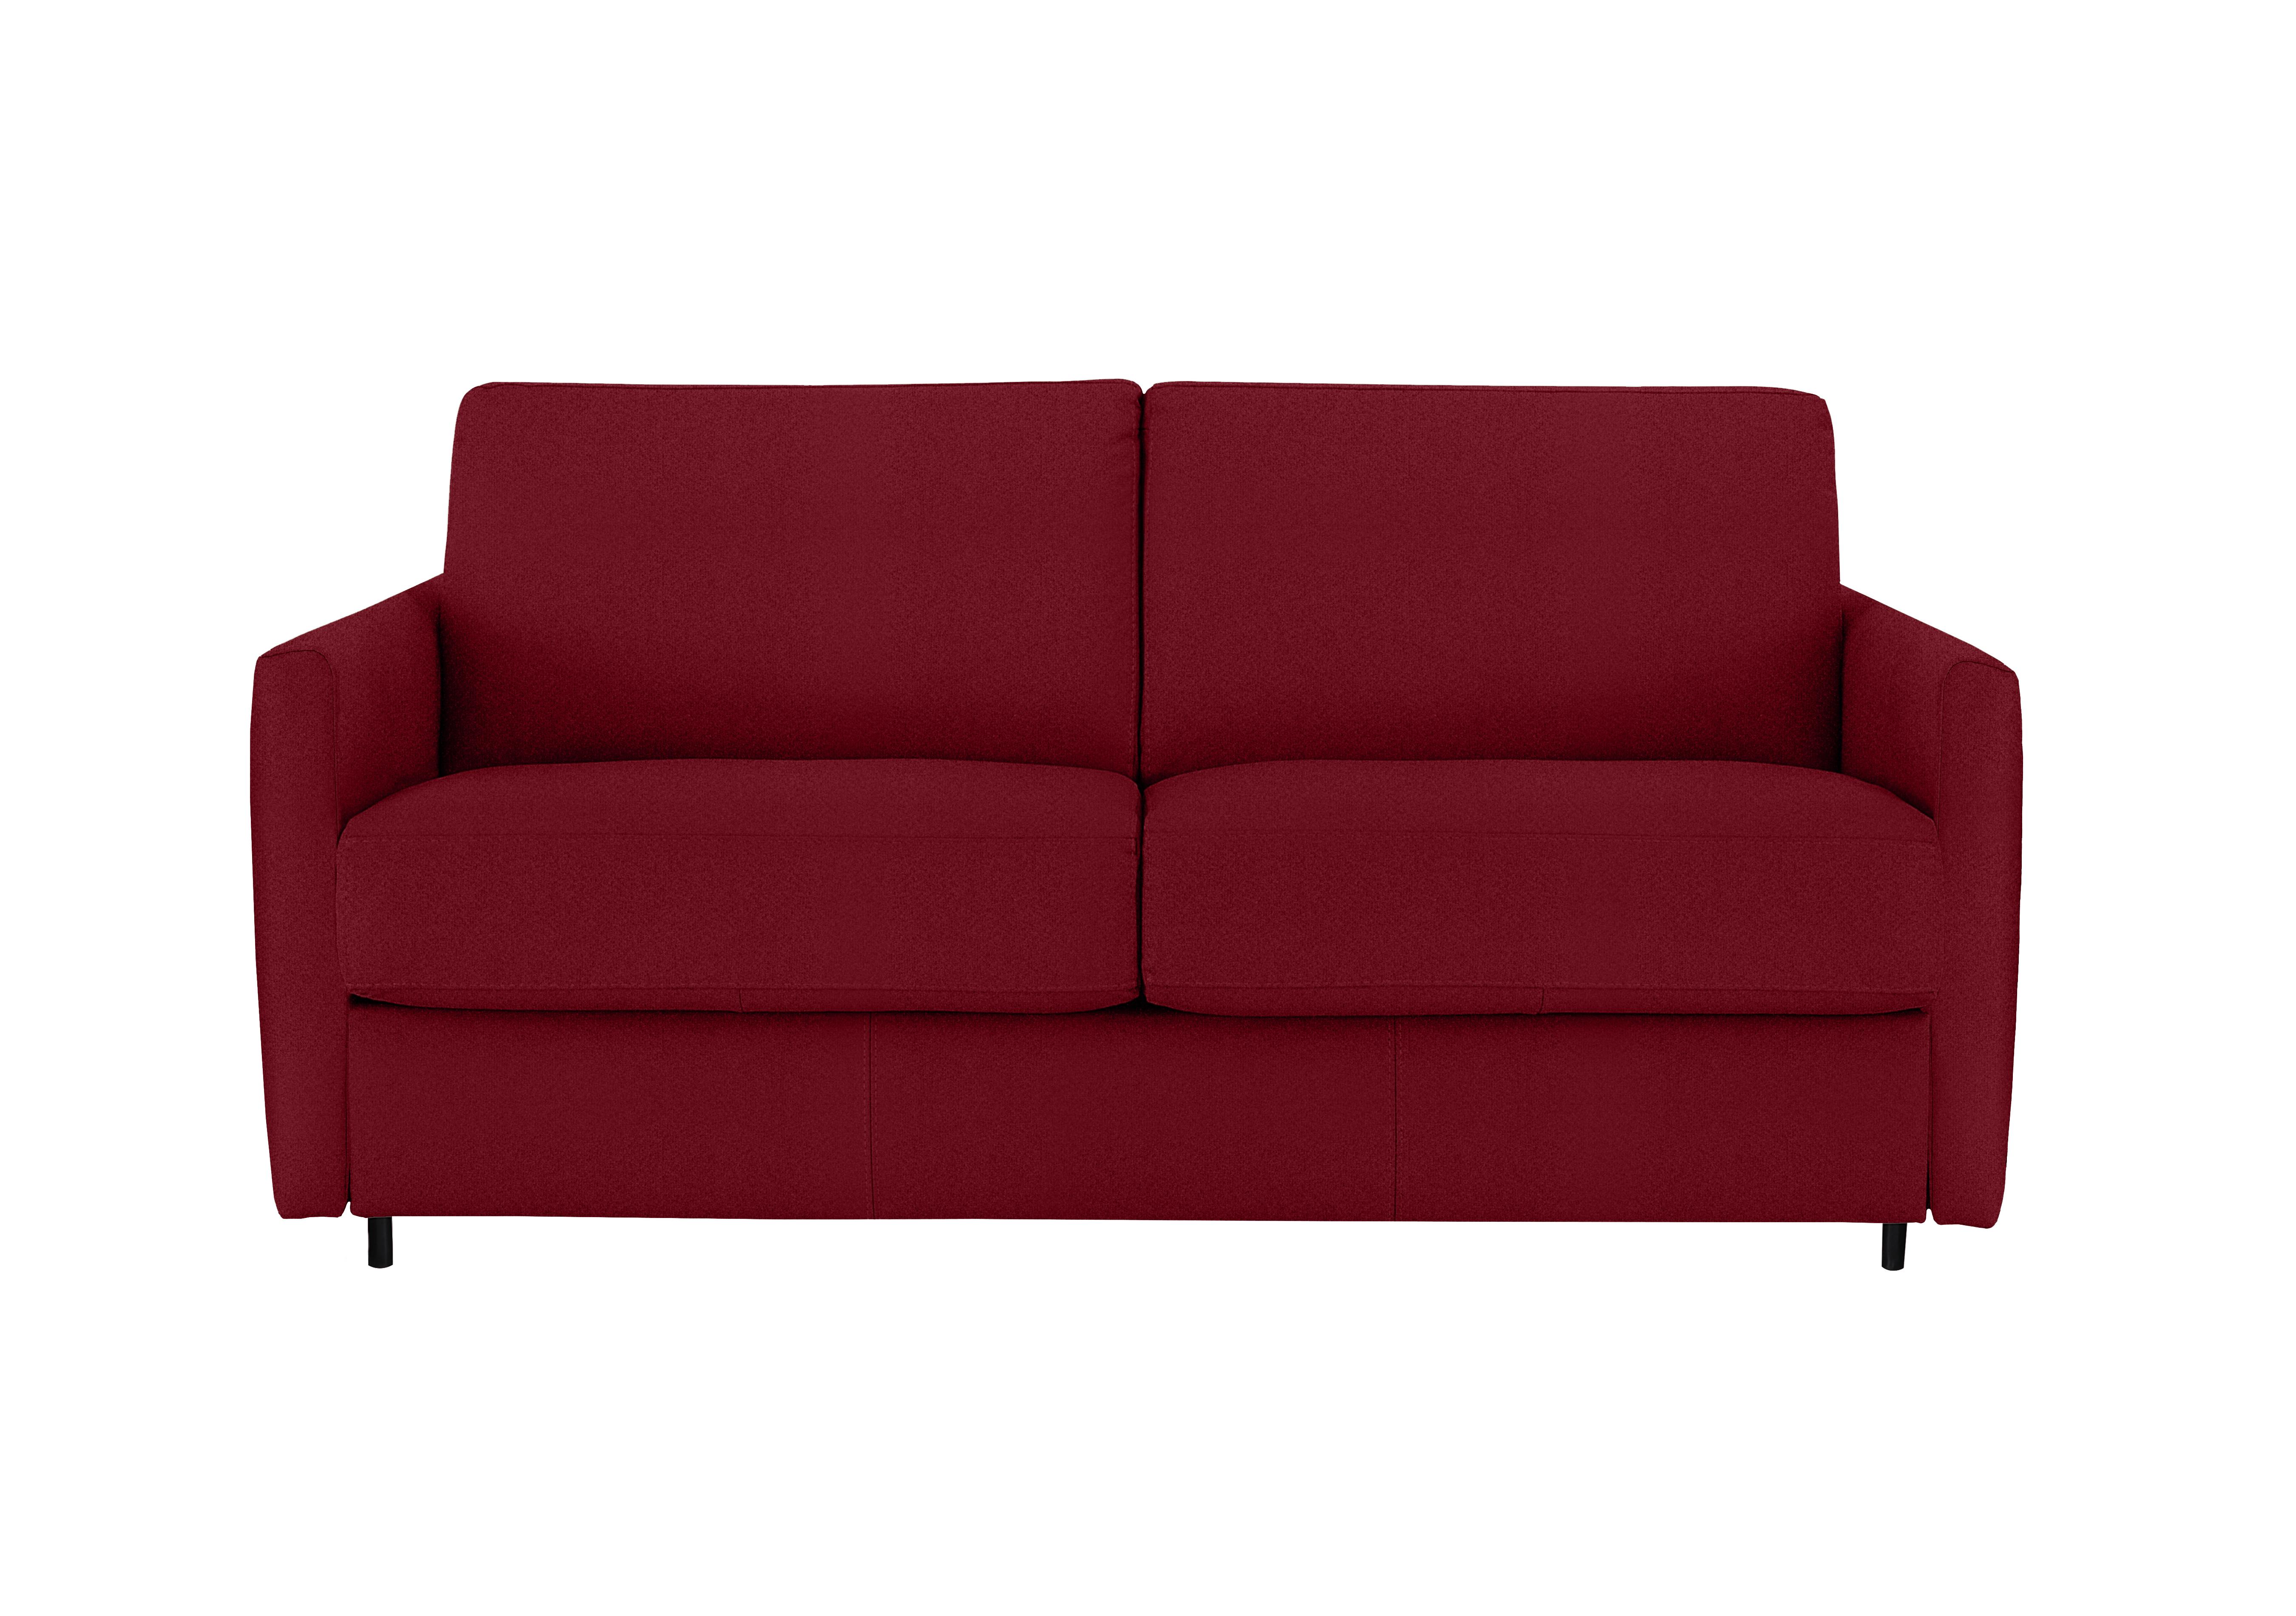 Alcova 2.5 Seater Fabric Sofa Bed with Slim Arms in Coupe Rosso 305 on Furniture Village